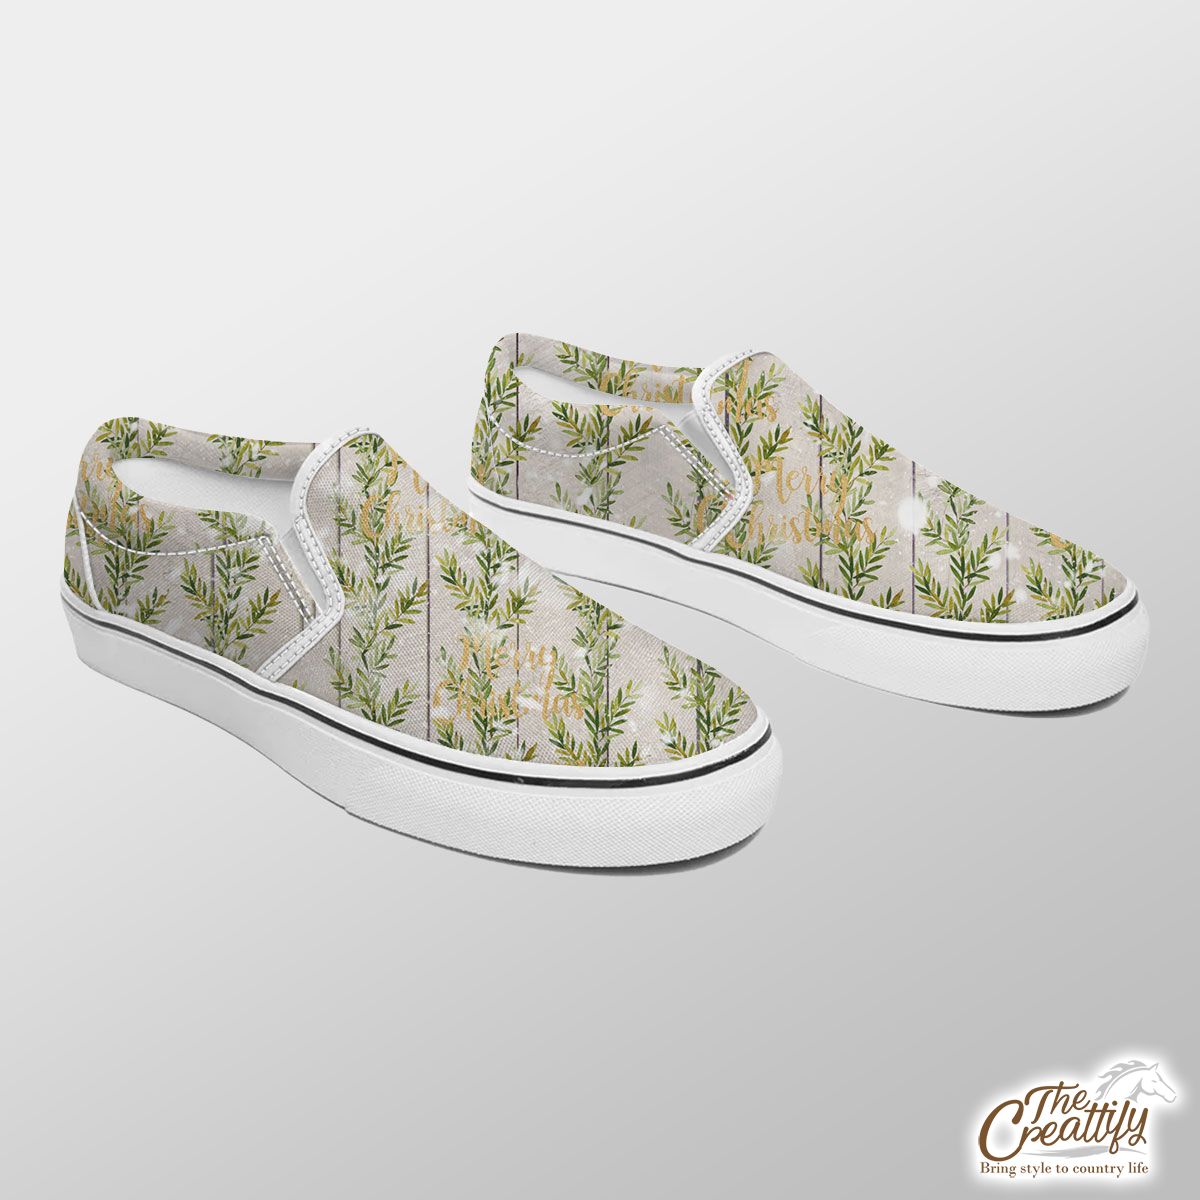 Pine Tree With Merry Christmas Wishes Slip On Sneakers